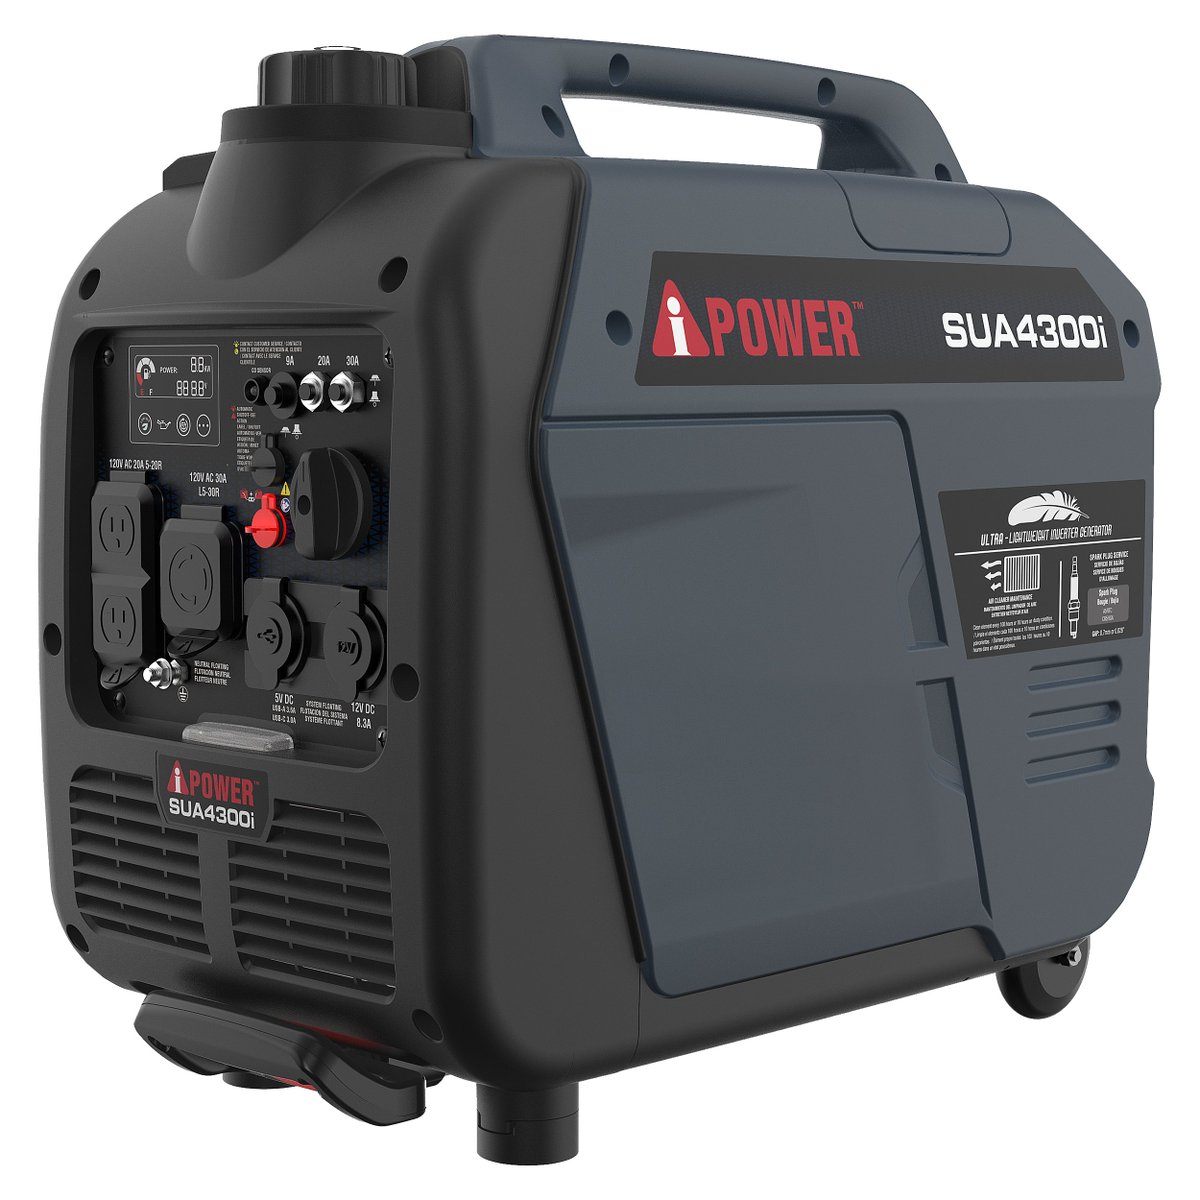 The A-iPower SUA4300i inverter features low idle technology, factory installed telescopic handle and wheels, and a CO Sensor with automatic shutdown. a-ipower.com/products/sua43… #portablegenerators #inverters #invertergenerators #aipowerup #portablepower